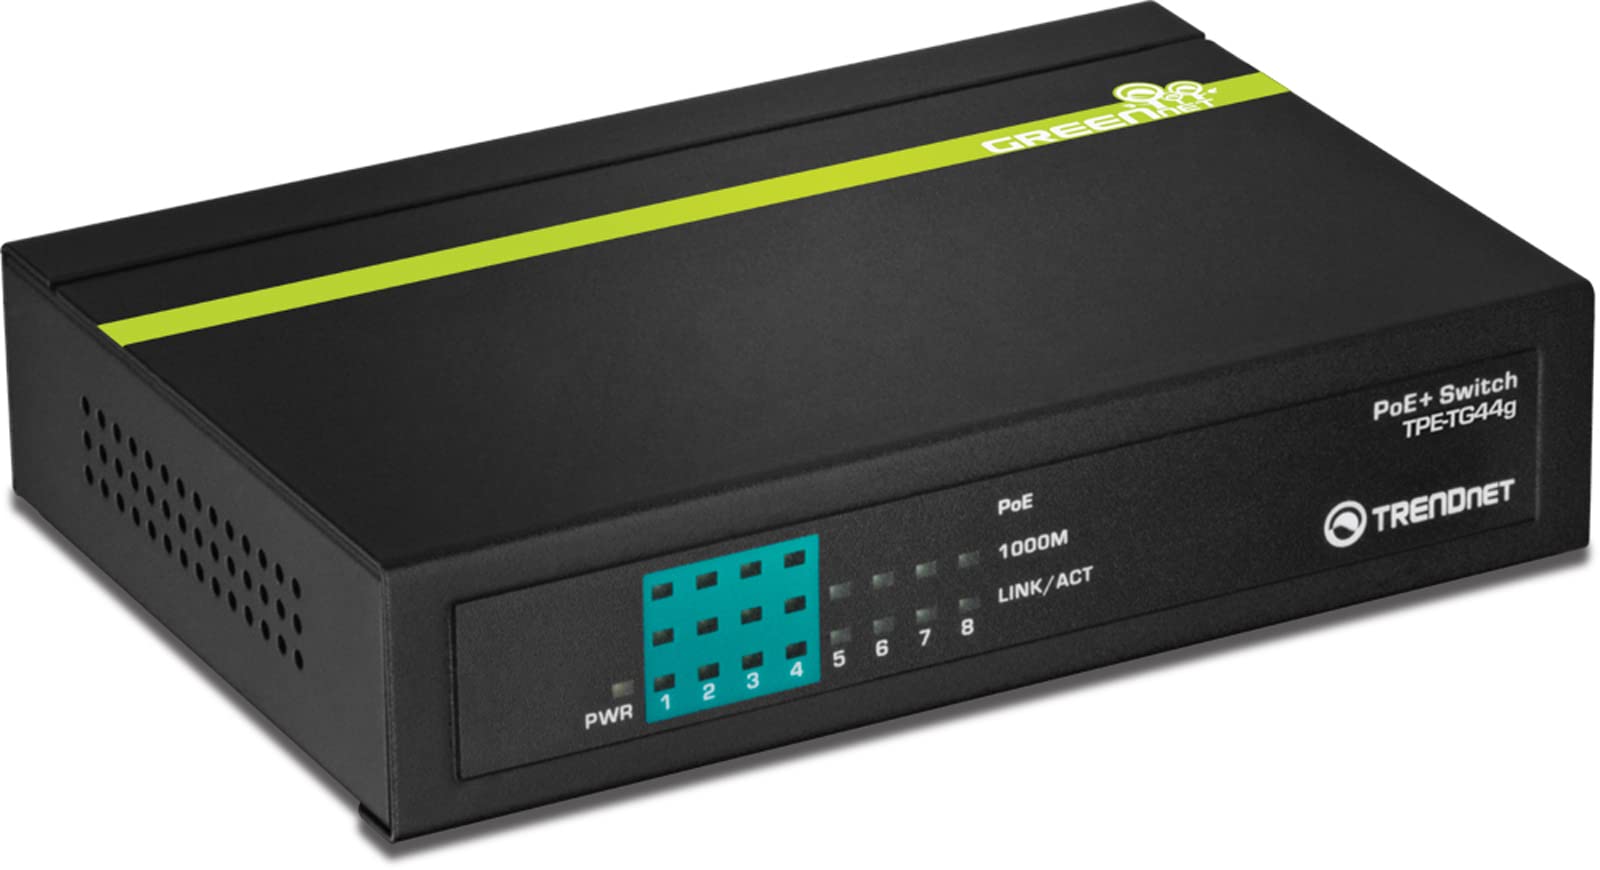 Book Cover TRENDnet 8-Port Gigabit GREENnet PoE+ Switch,TPE-TG44G, 4 x Gigabit PoE/PoE+ Up to 30 Watts/Port, 4 x Gigabit, 61W Power Budget, 16 Gbps Switch Capacity, Ethernet Unmanaged Switch, Lifetime Protection Black